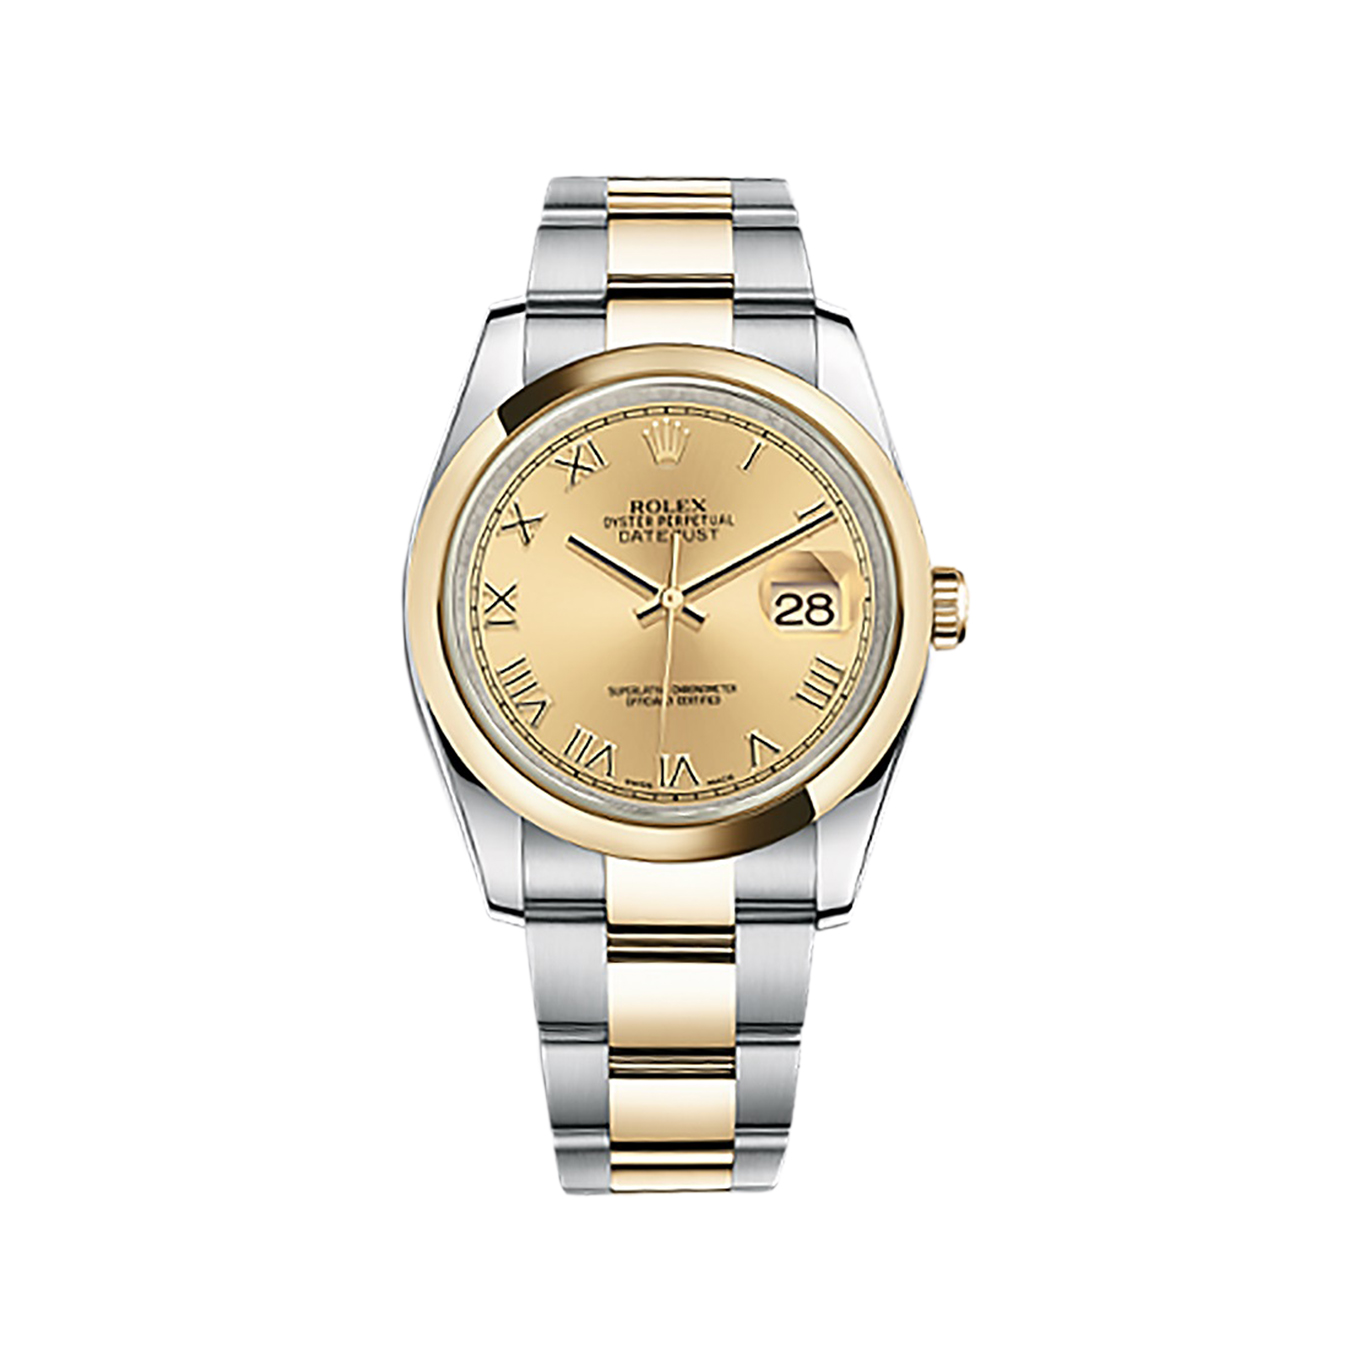 Datejust 36 116203 Gold & Stainless Steel Watch (Champagne)